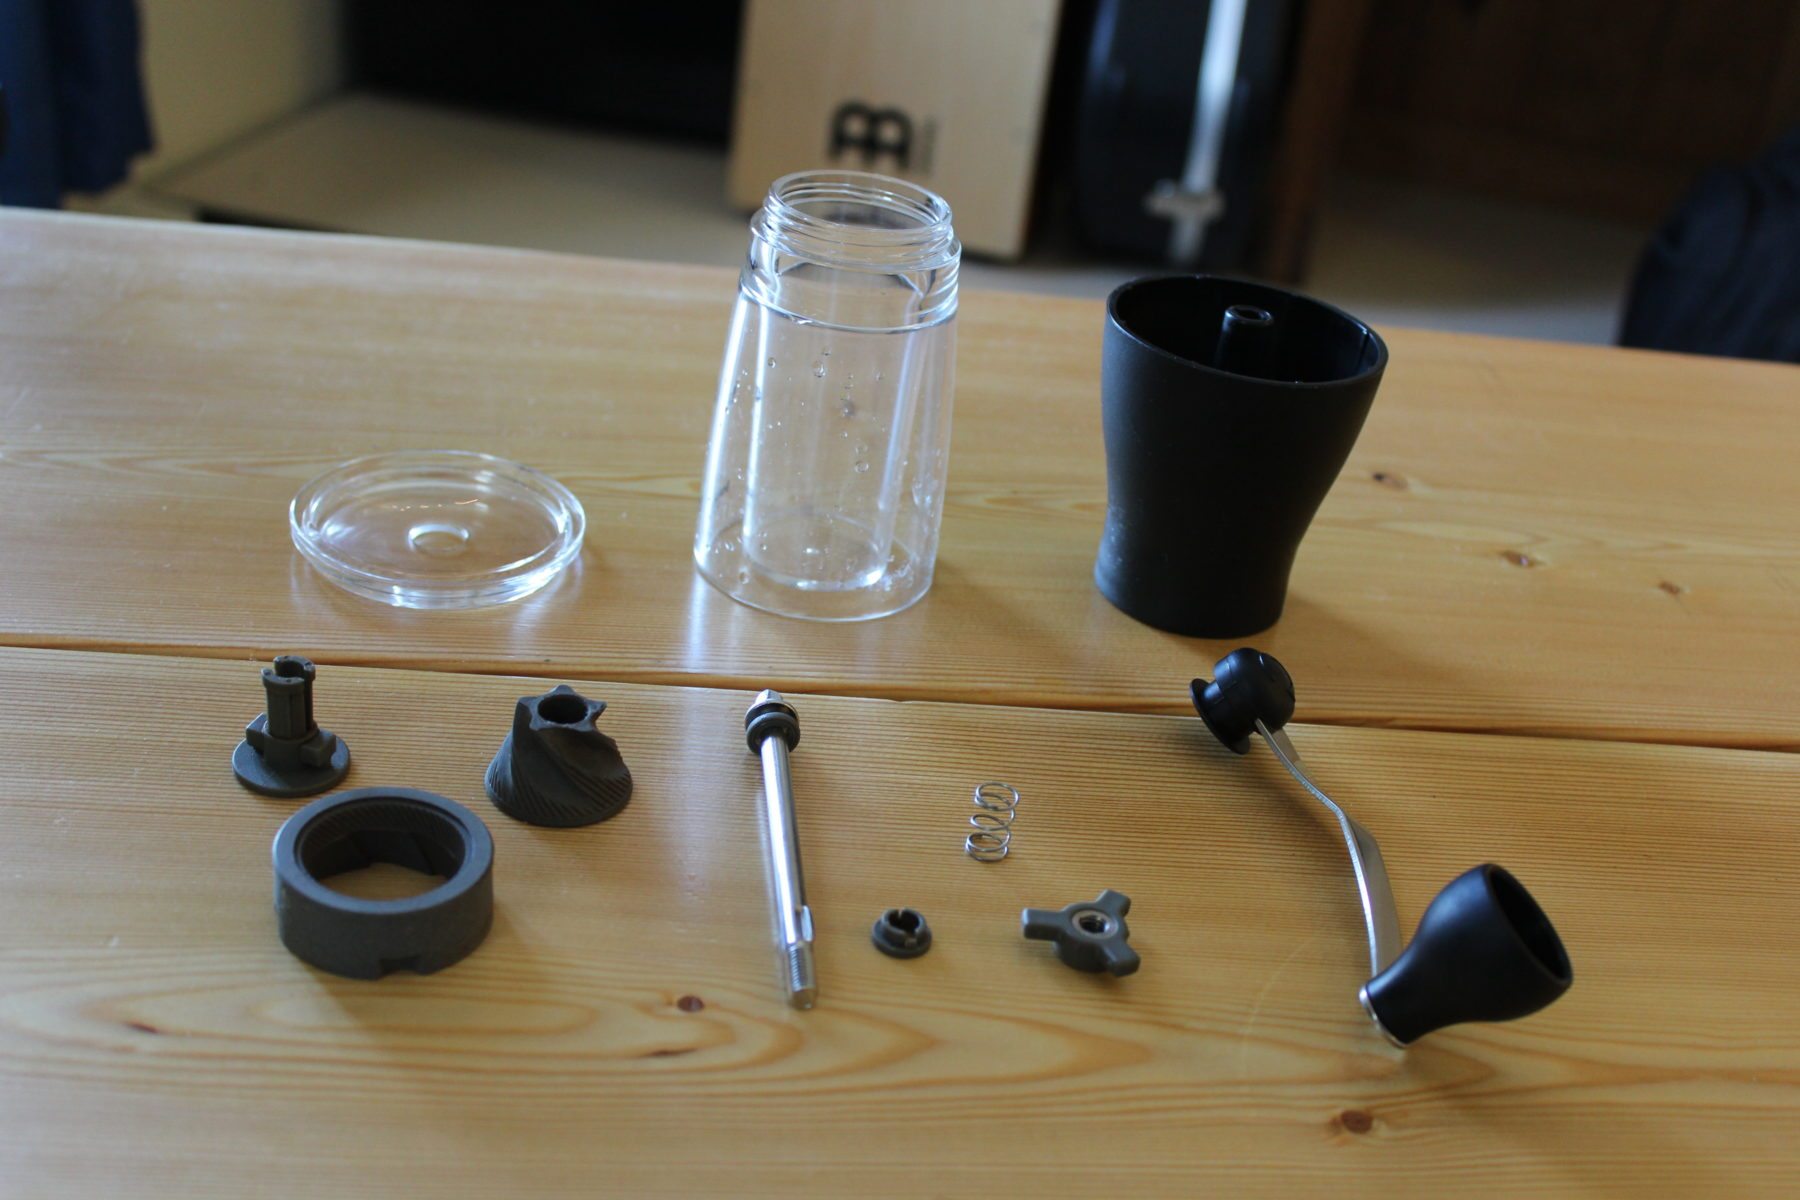 Hario Mini Mill Mod Guide: A Must-Do For This Coffee Grinder